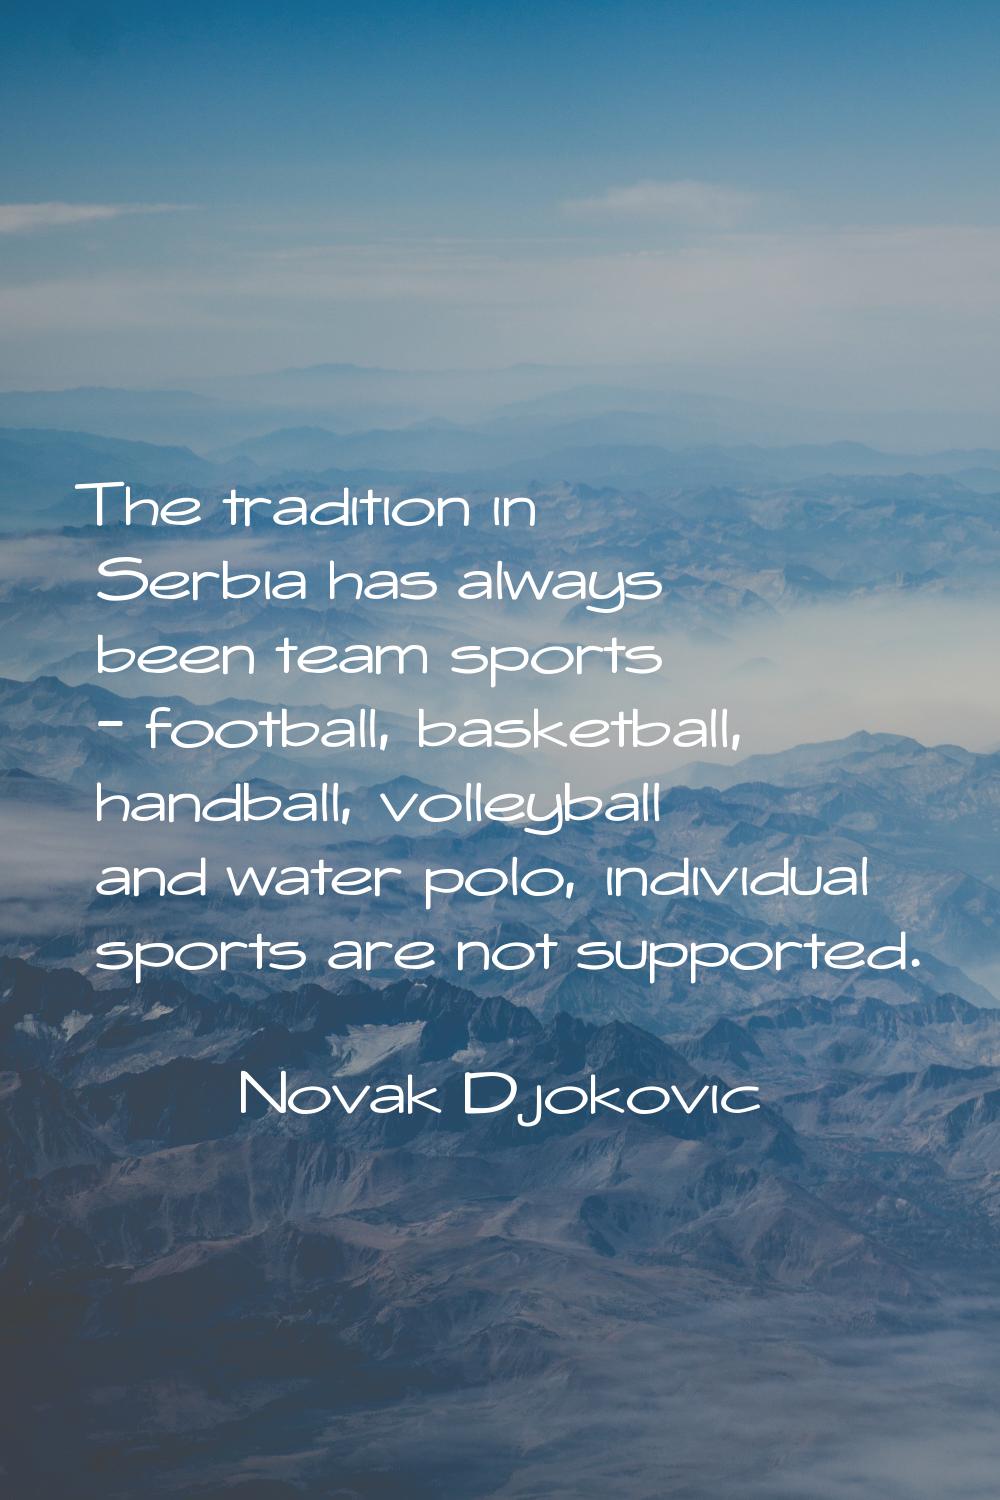 The tradition in Serbia has always been team sports - football, basketball, handball, volleyball an